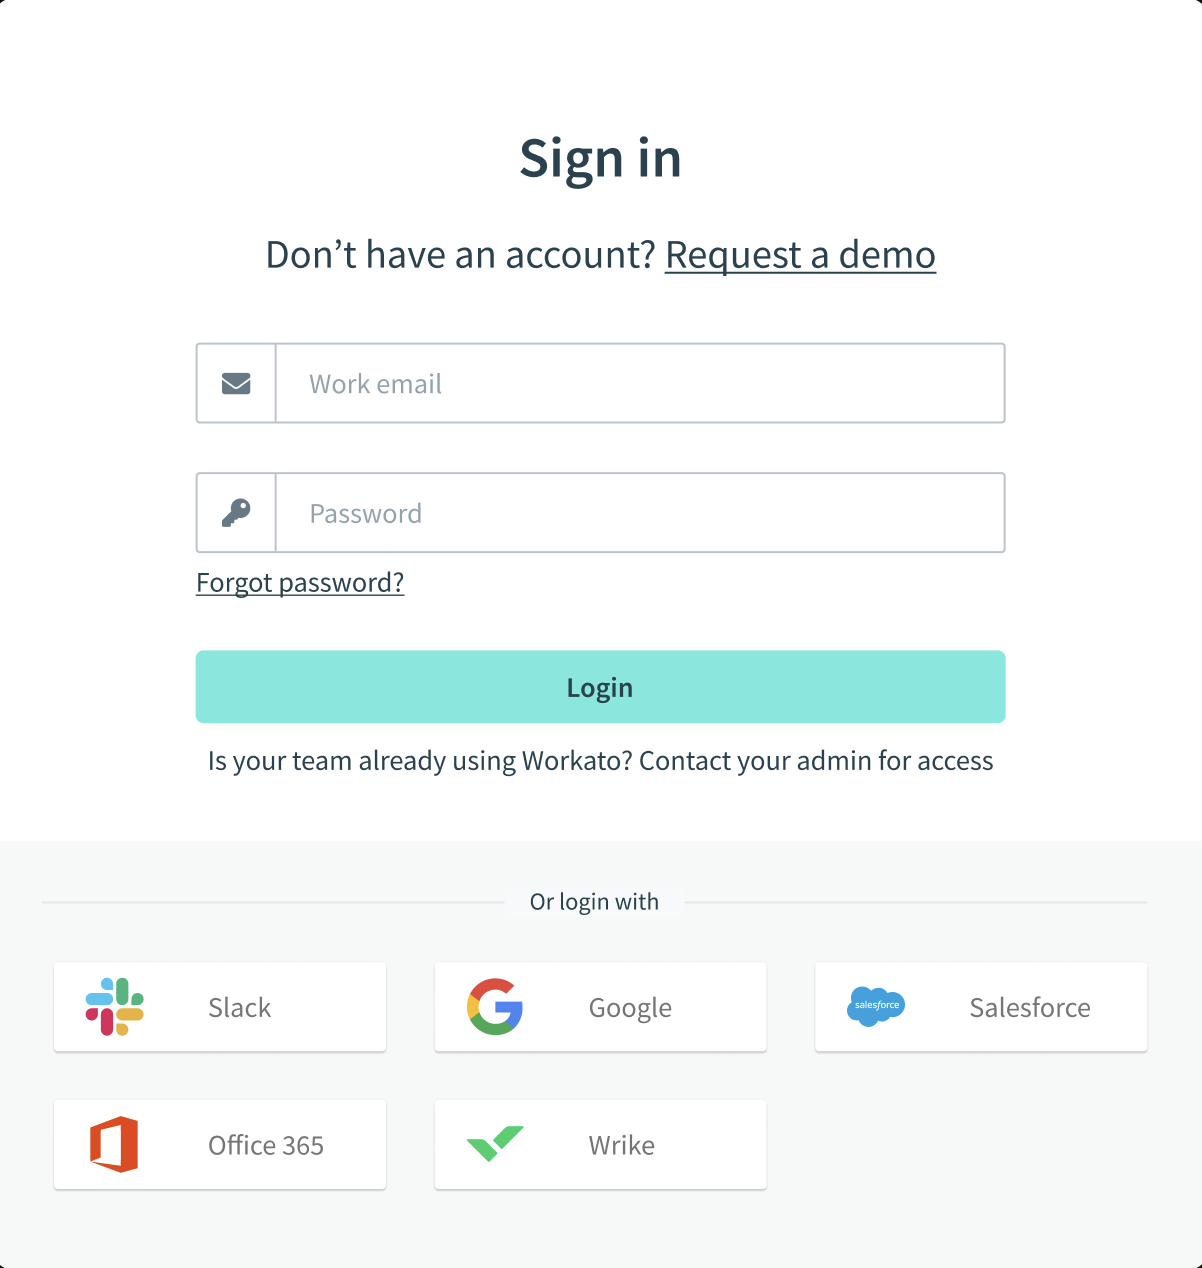 Sign in to Workato